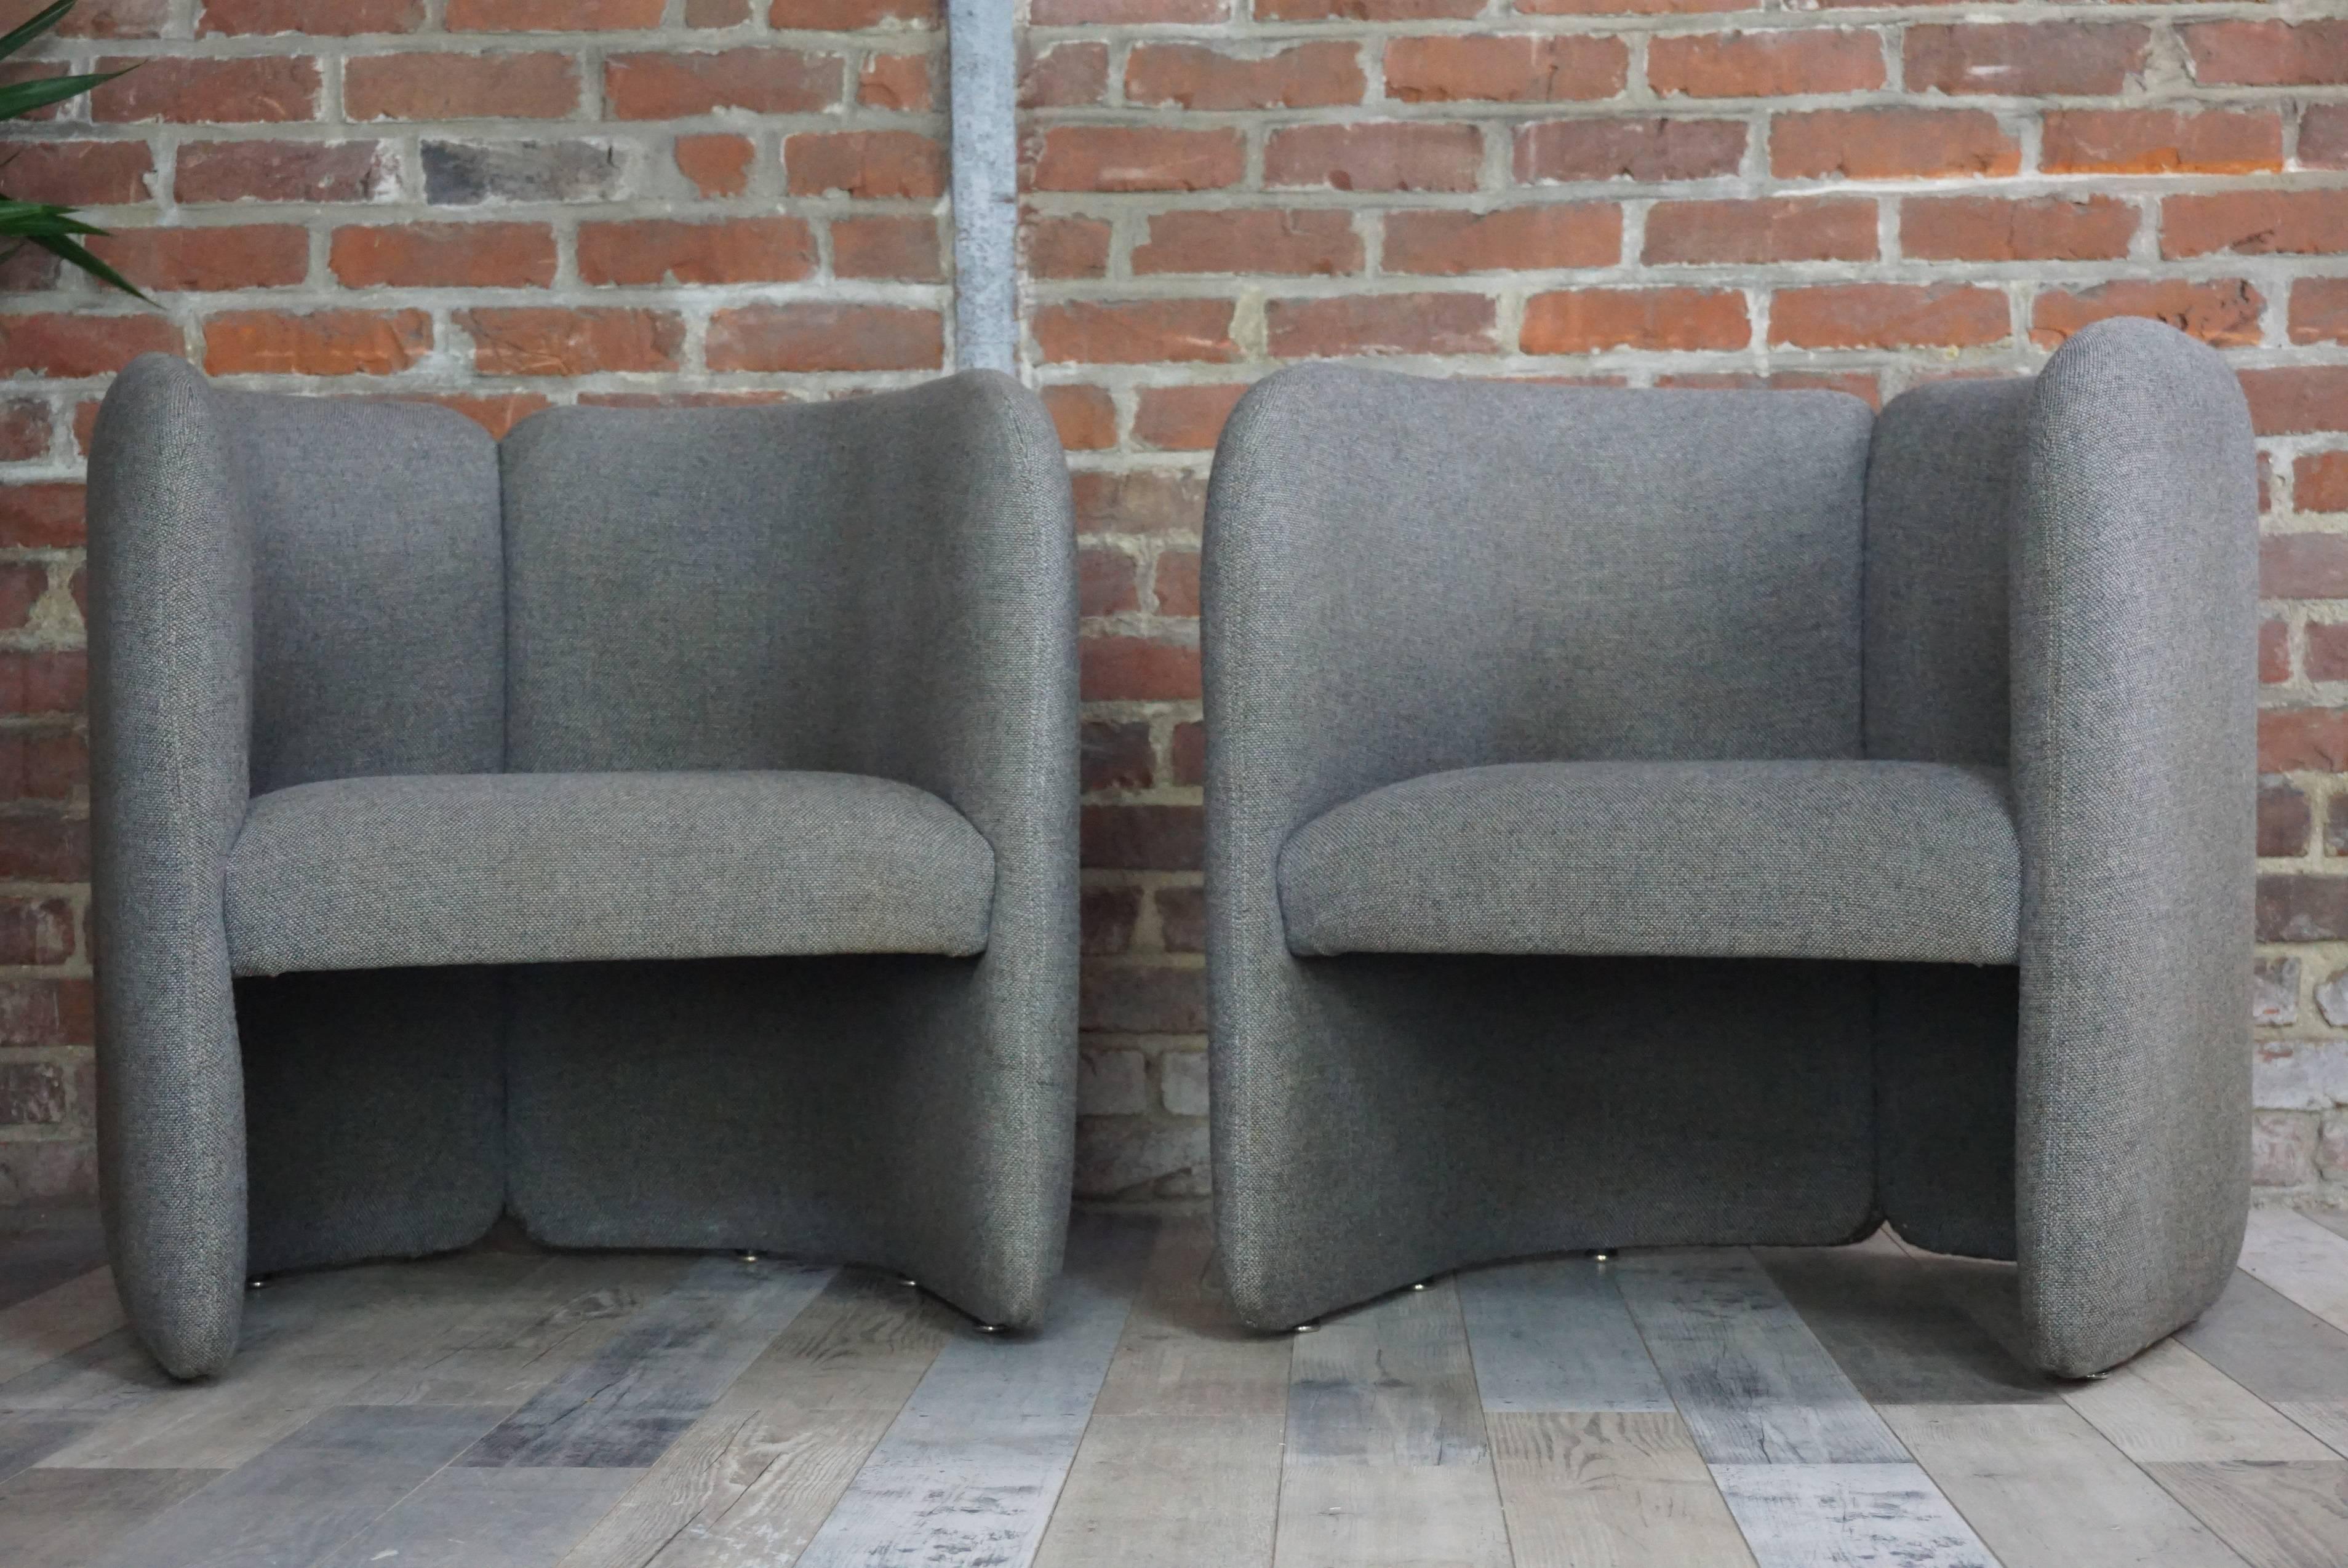 Comfortable, geometric and rounded, these Dutch design club armchairs in gray fabric recall the work of the famous Italian architect Eugenio Gerli.